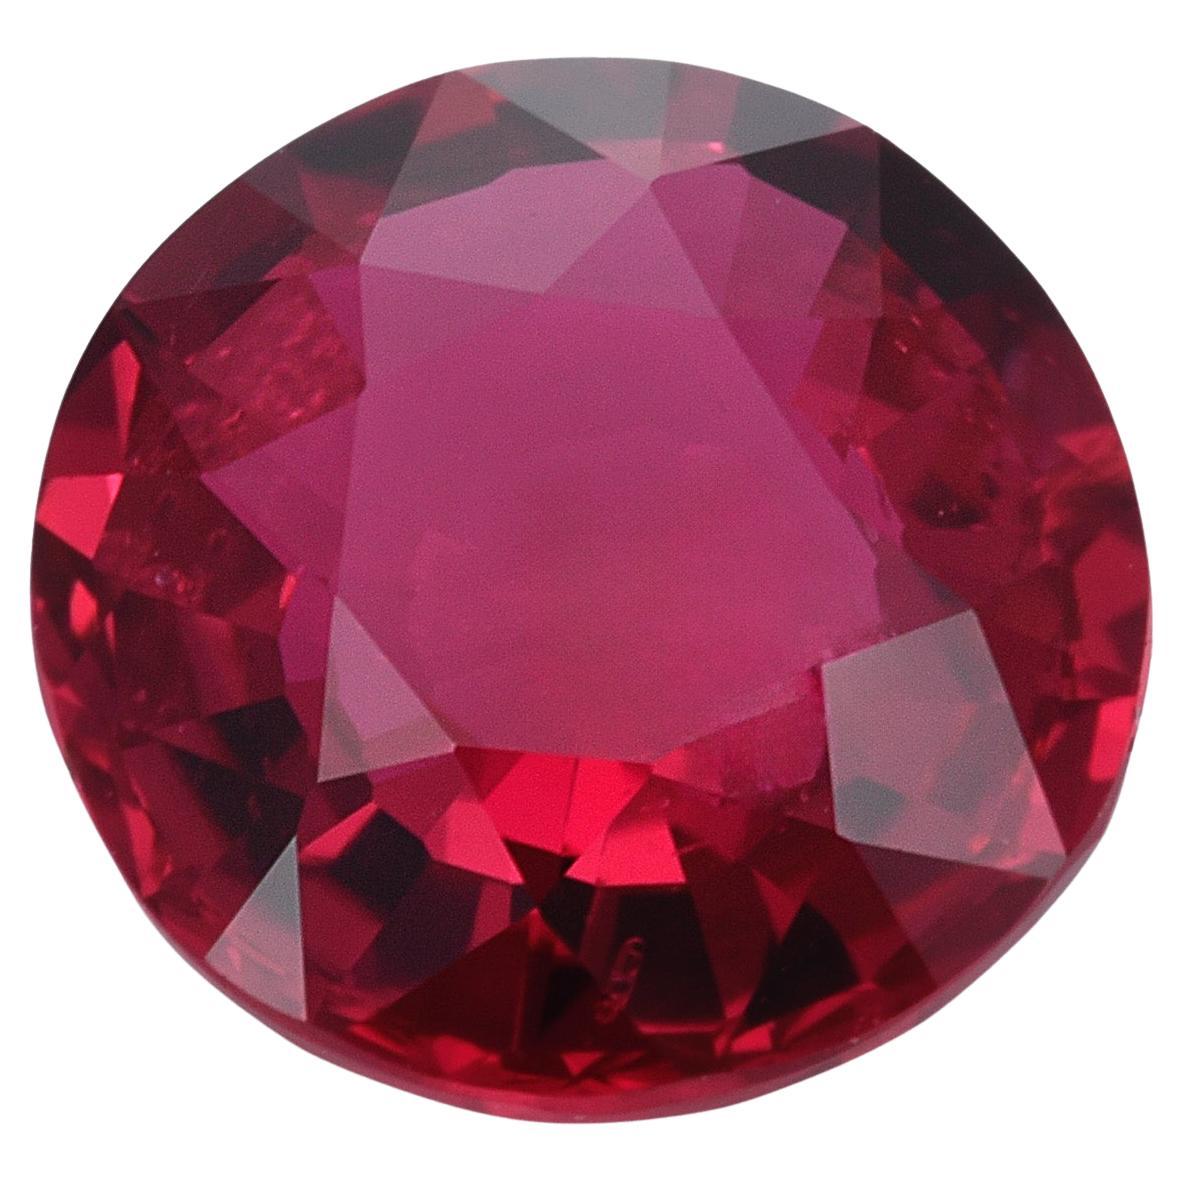 GIA Certified 1.31 Carats Unheated Mozambique Ruby